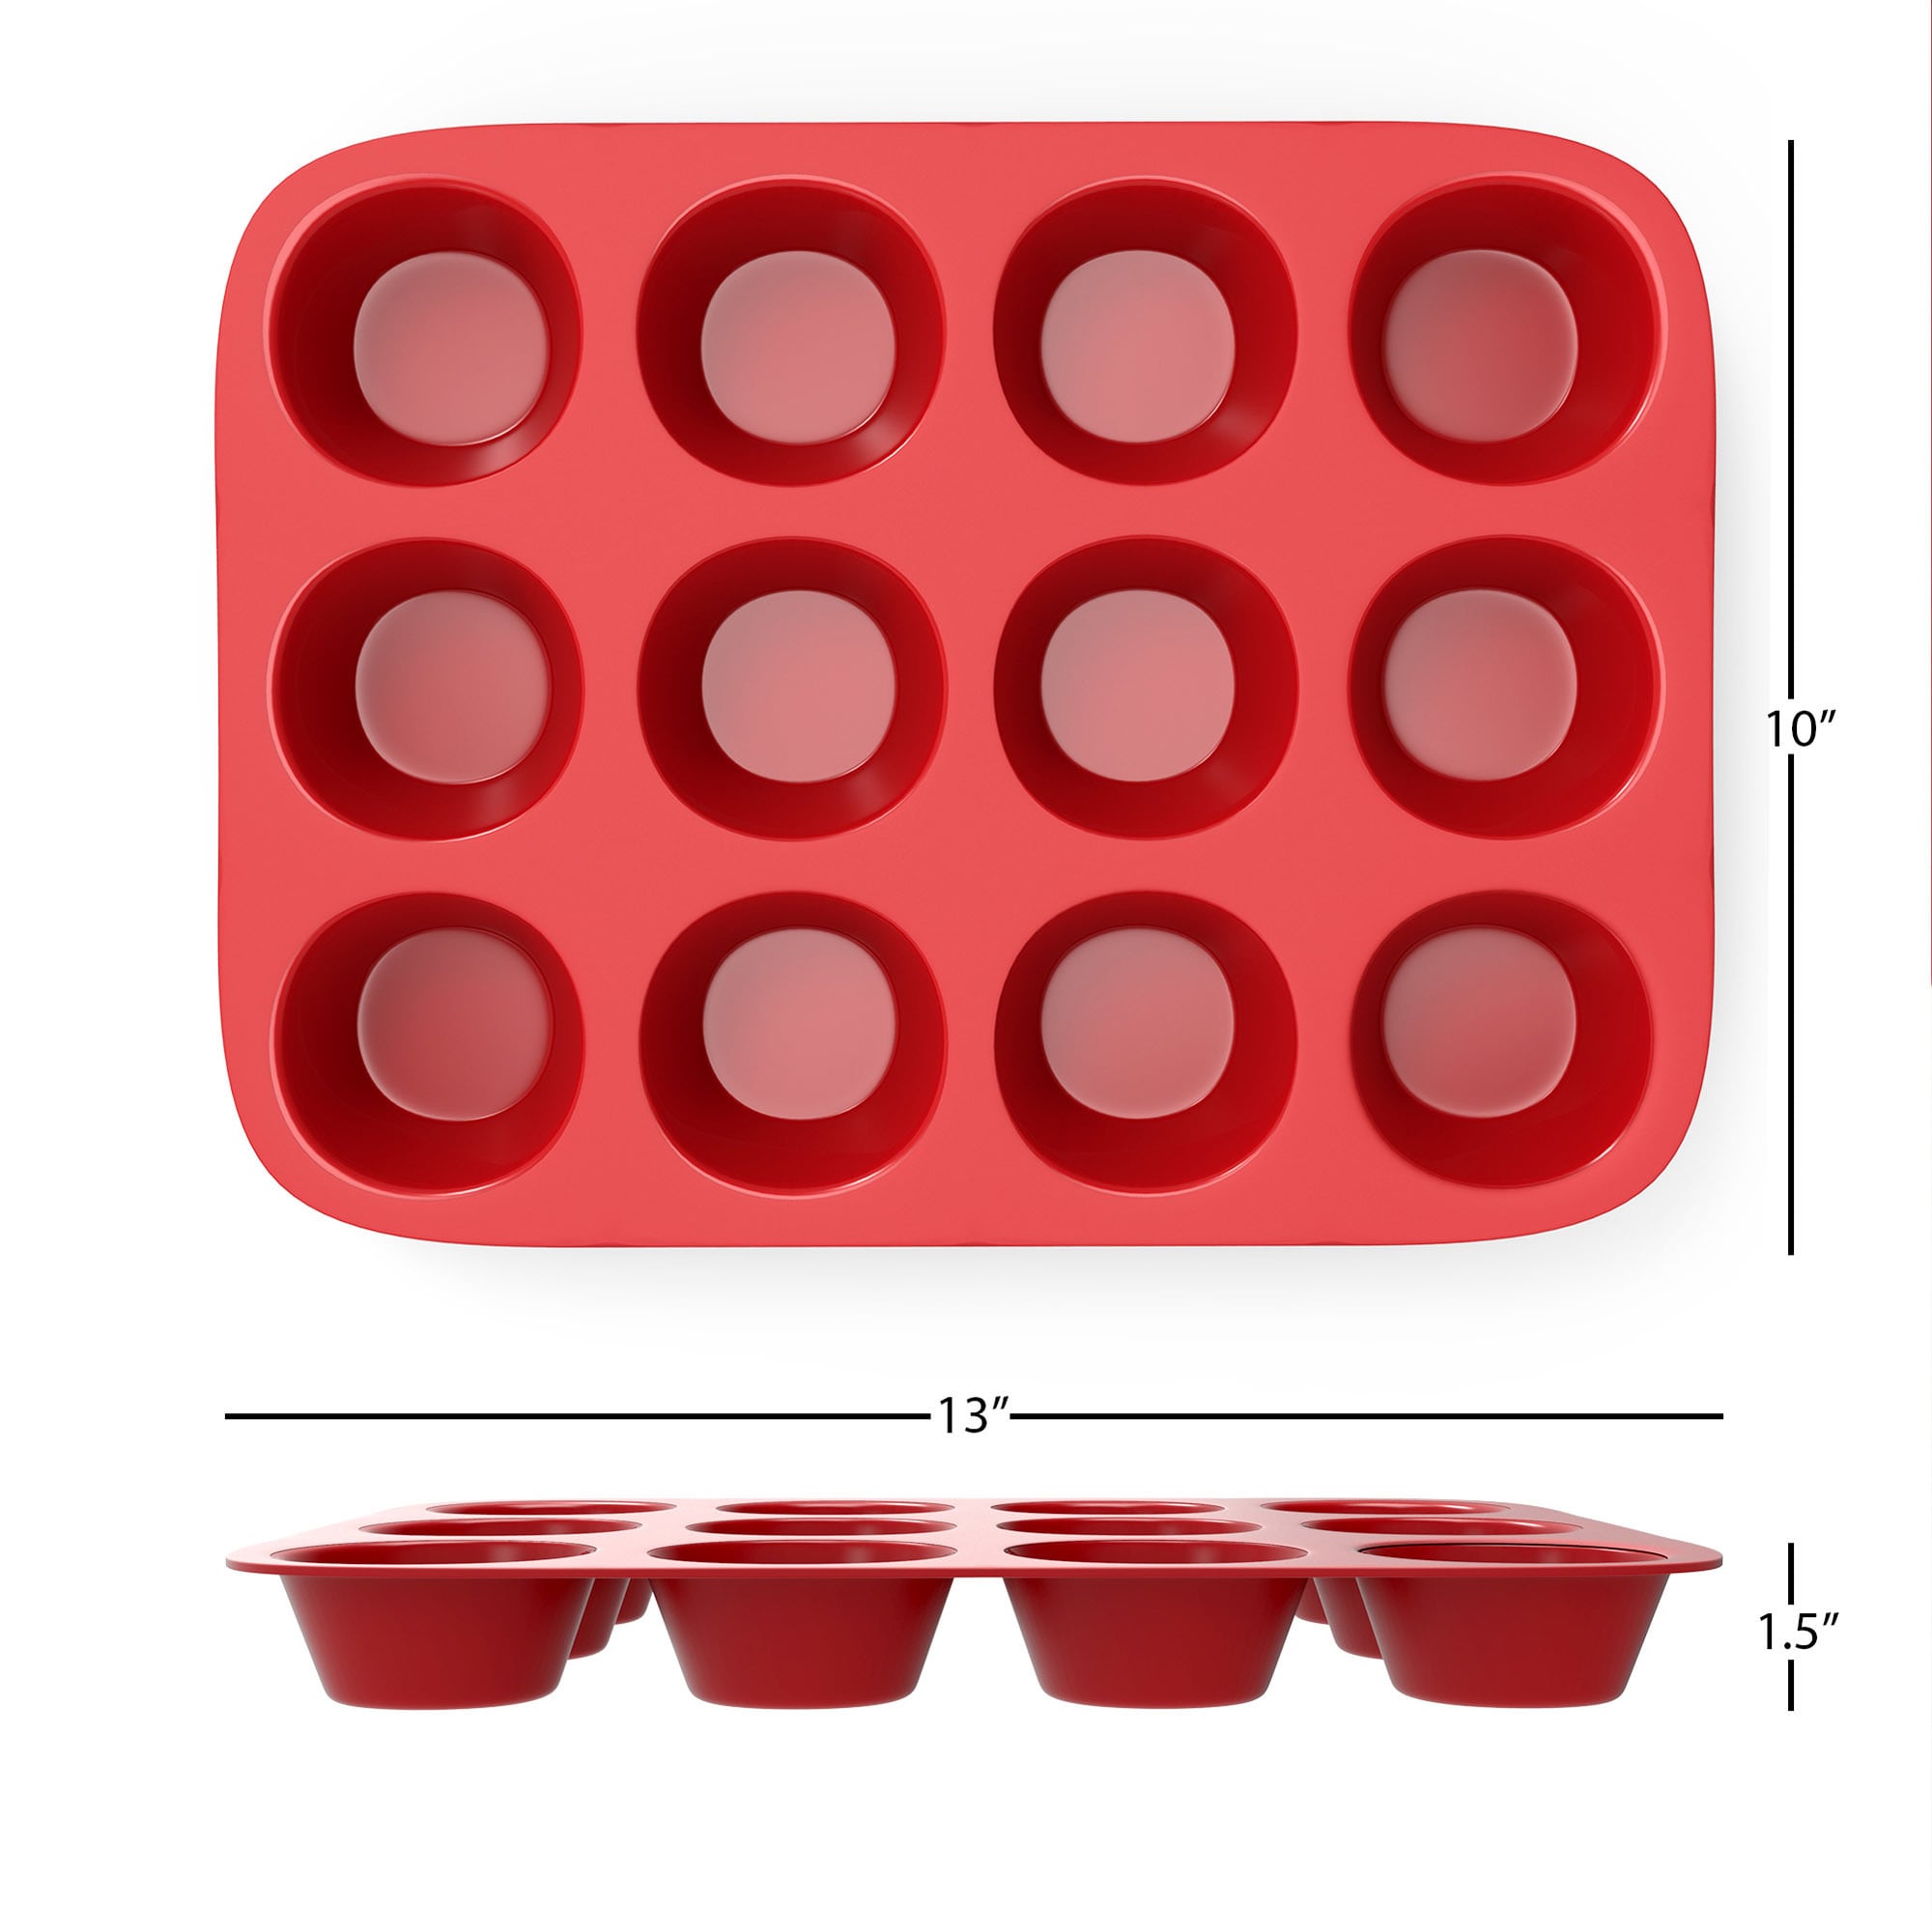 D2.4/" 6-Cell Puff Muffin Cupcake Pastry Pudding Silicone Mold Pan Baking Tray